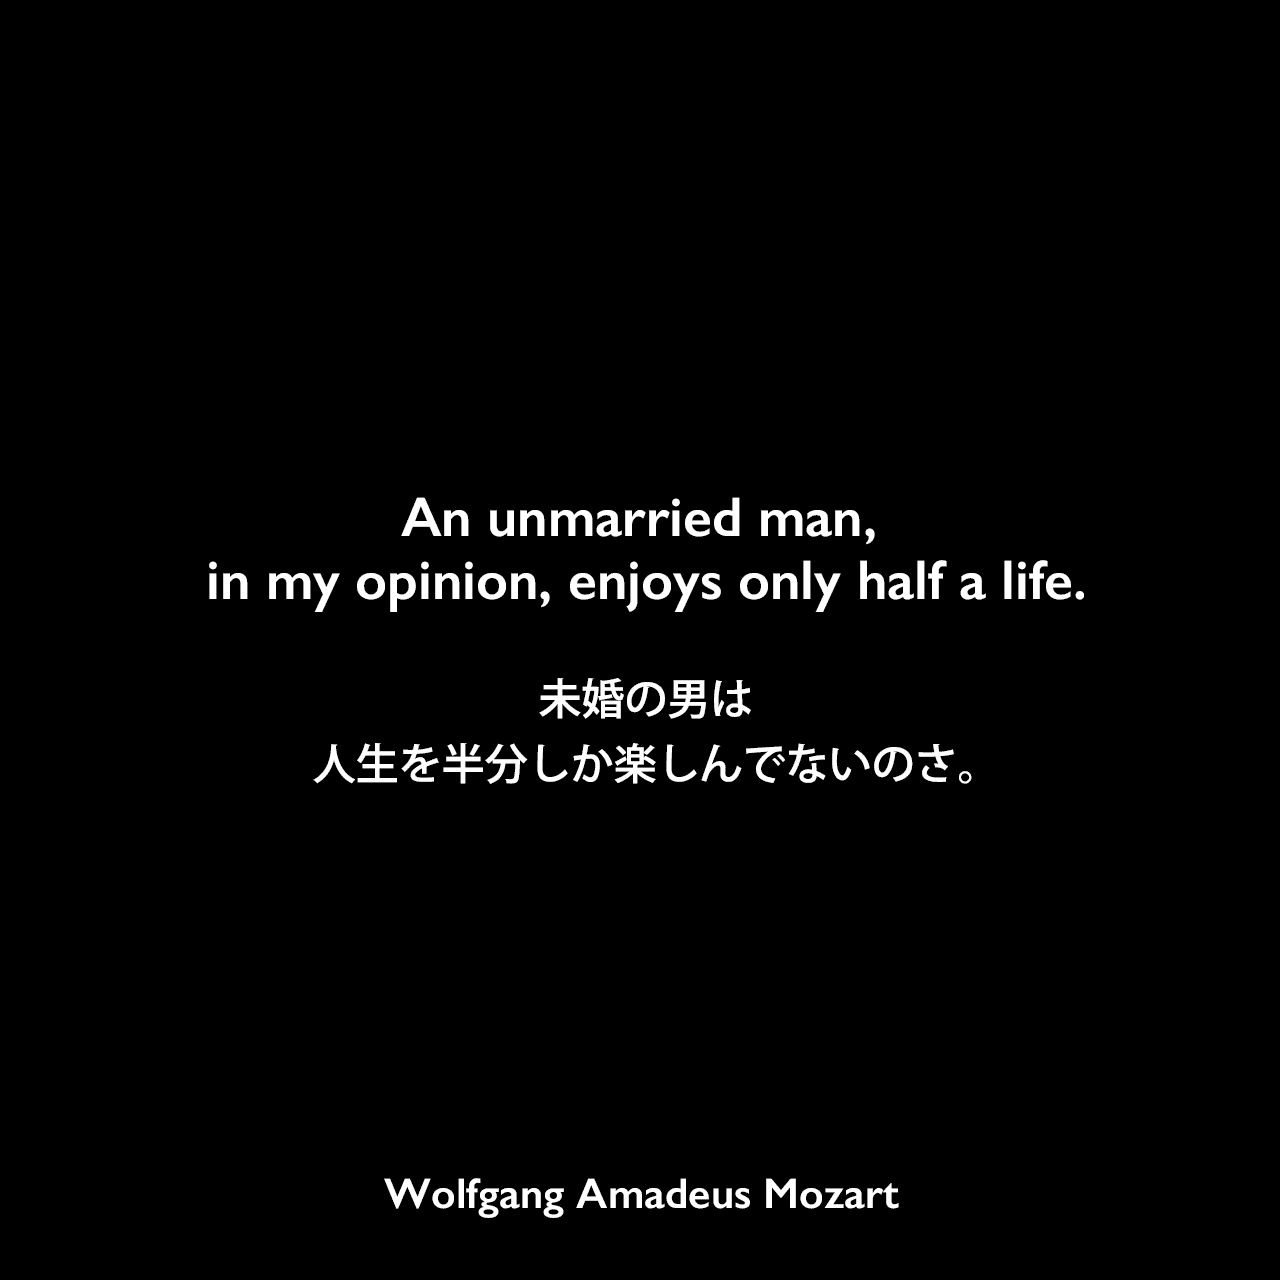 An unmarried man, in my opinion, enjoys only half a life.未婚の男は人生をは文しか楽しんでないのさ。Wolfgang Amadeus Mozart